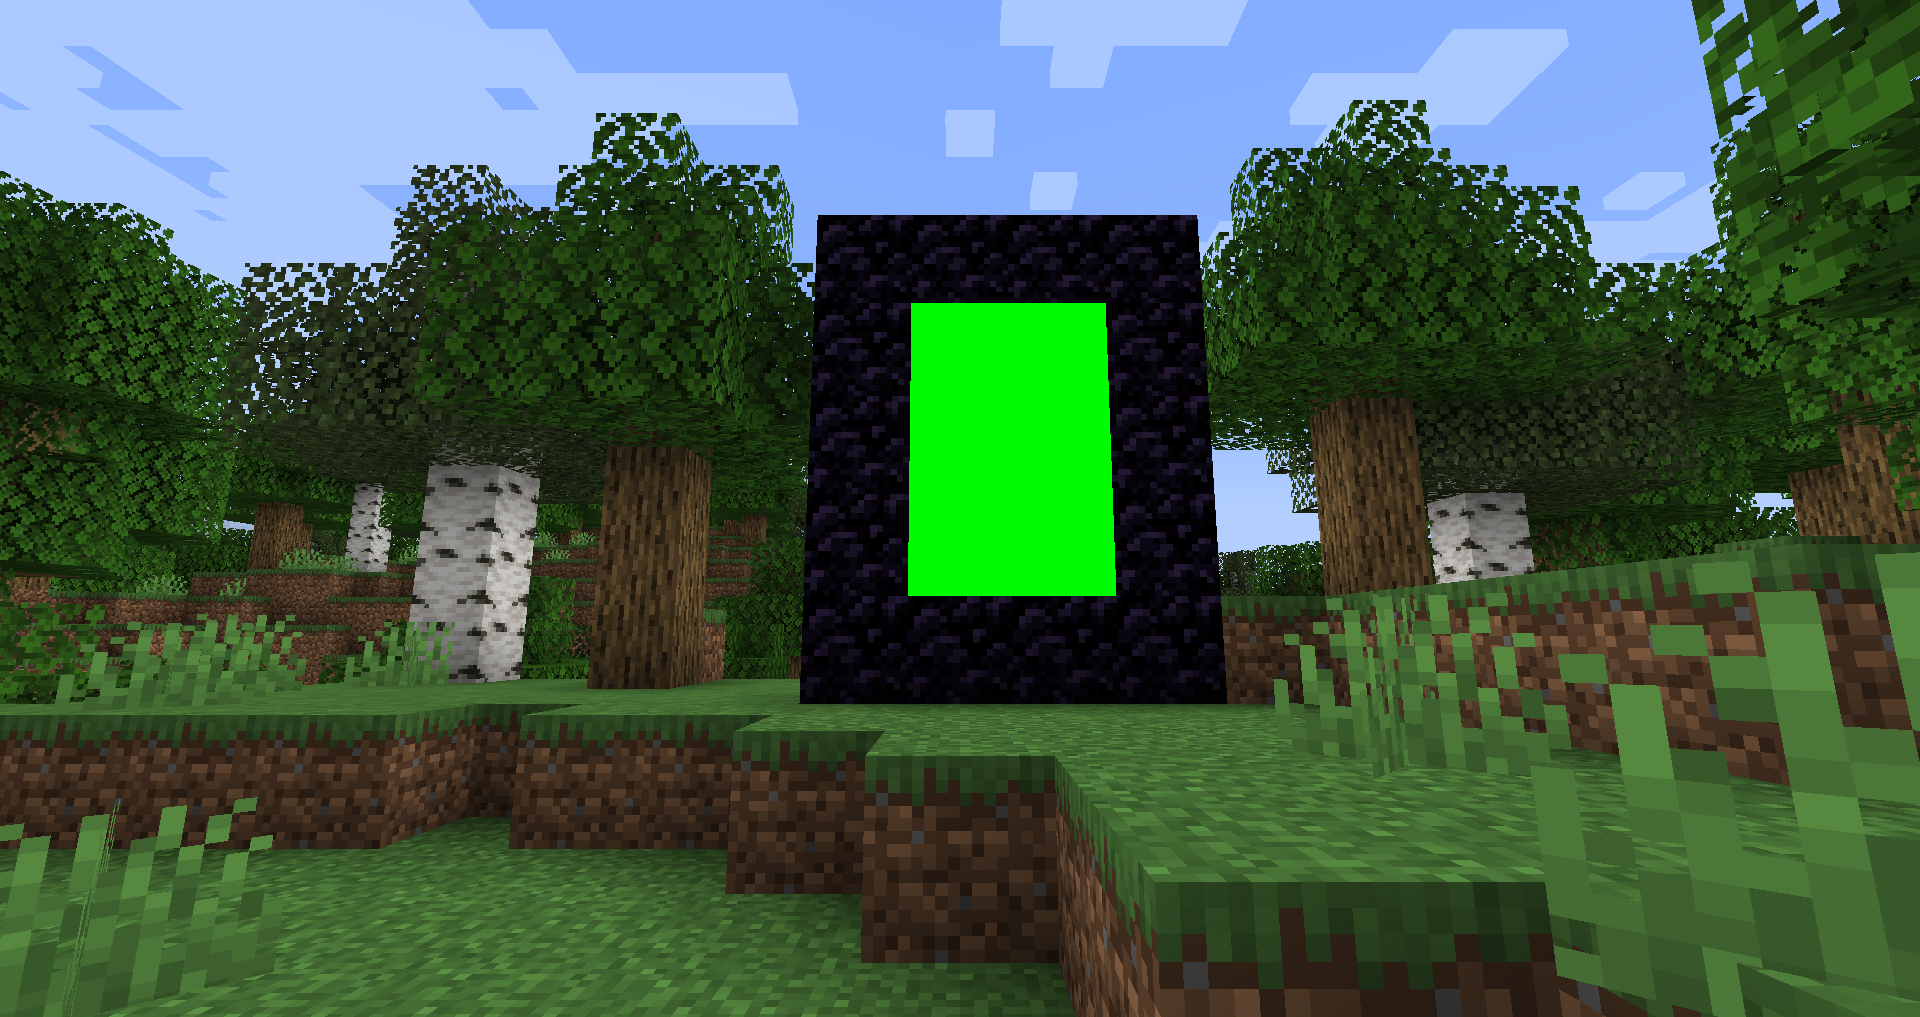 Replacing the portal blocks inside of a portal with Verdant Froglights I was able to make a simple Meme template in seconds!